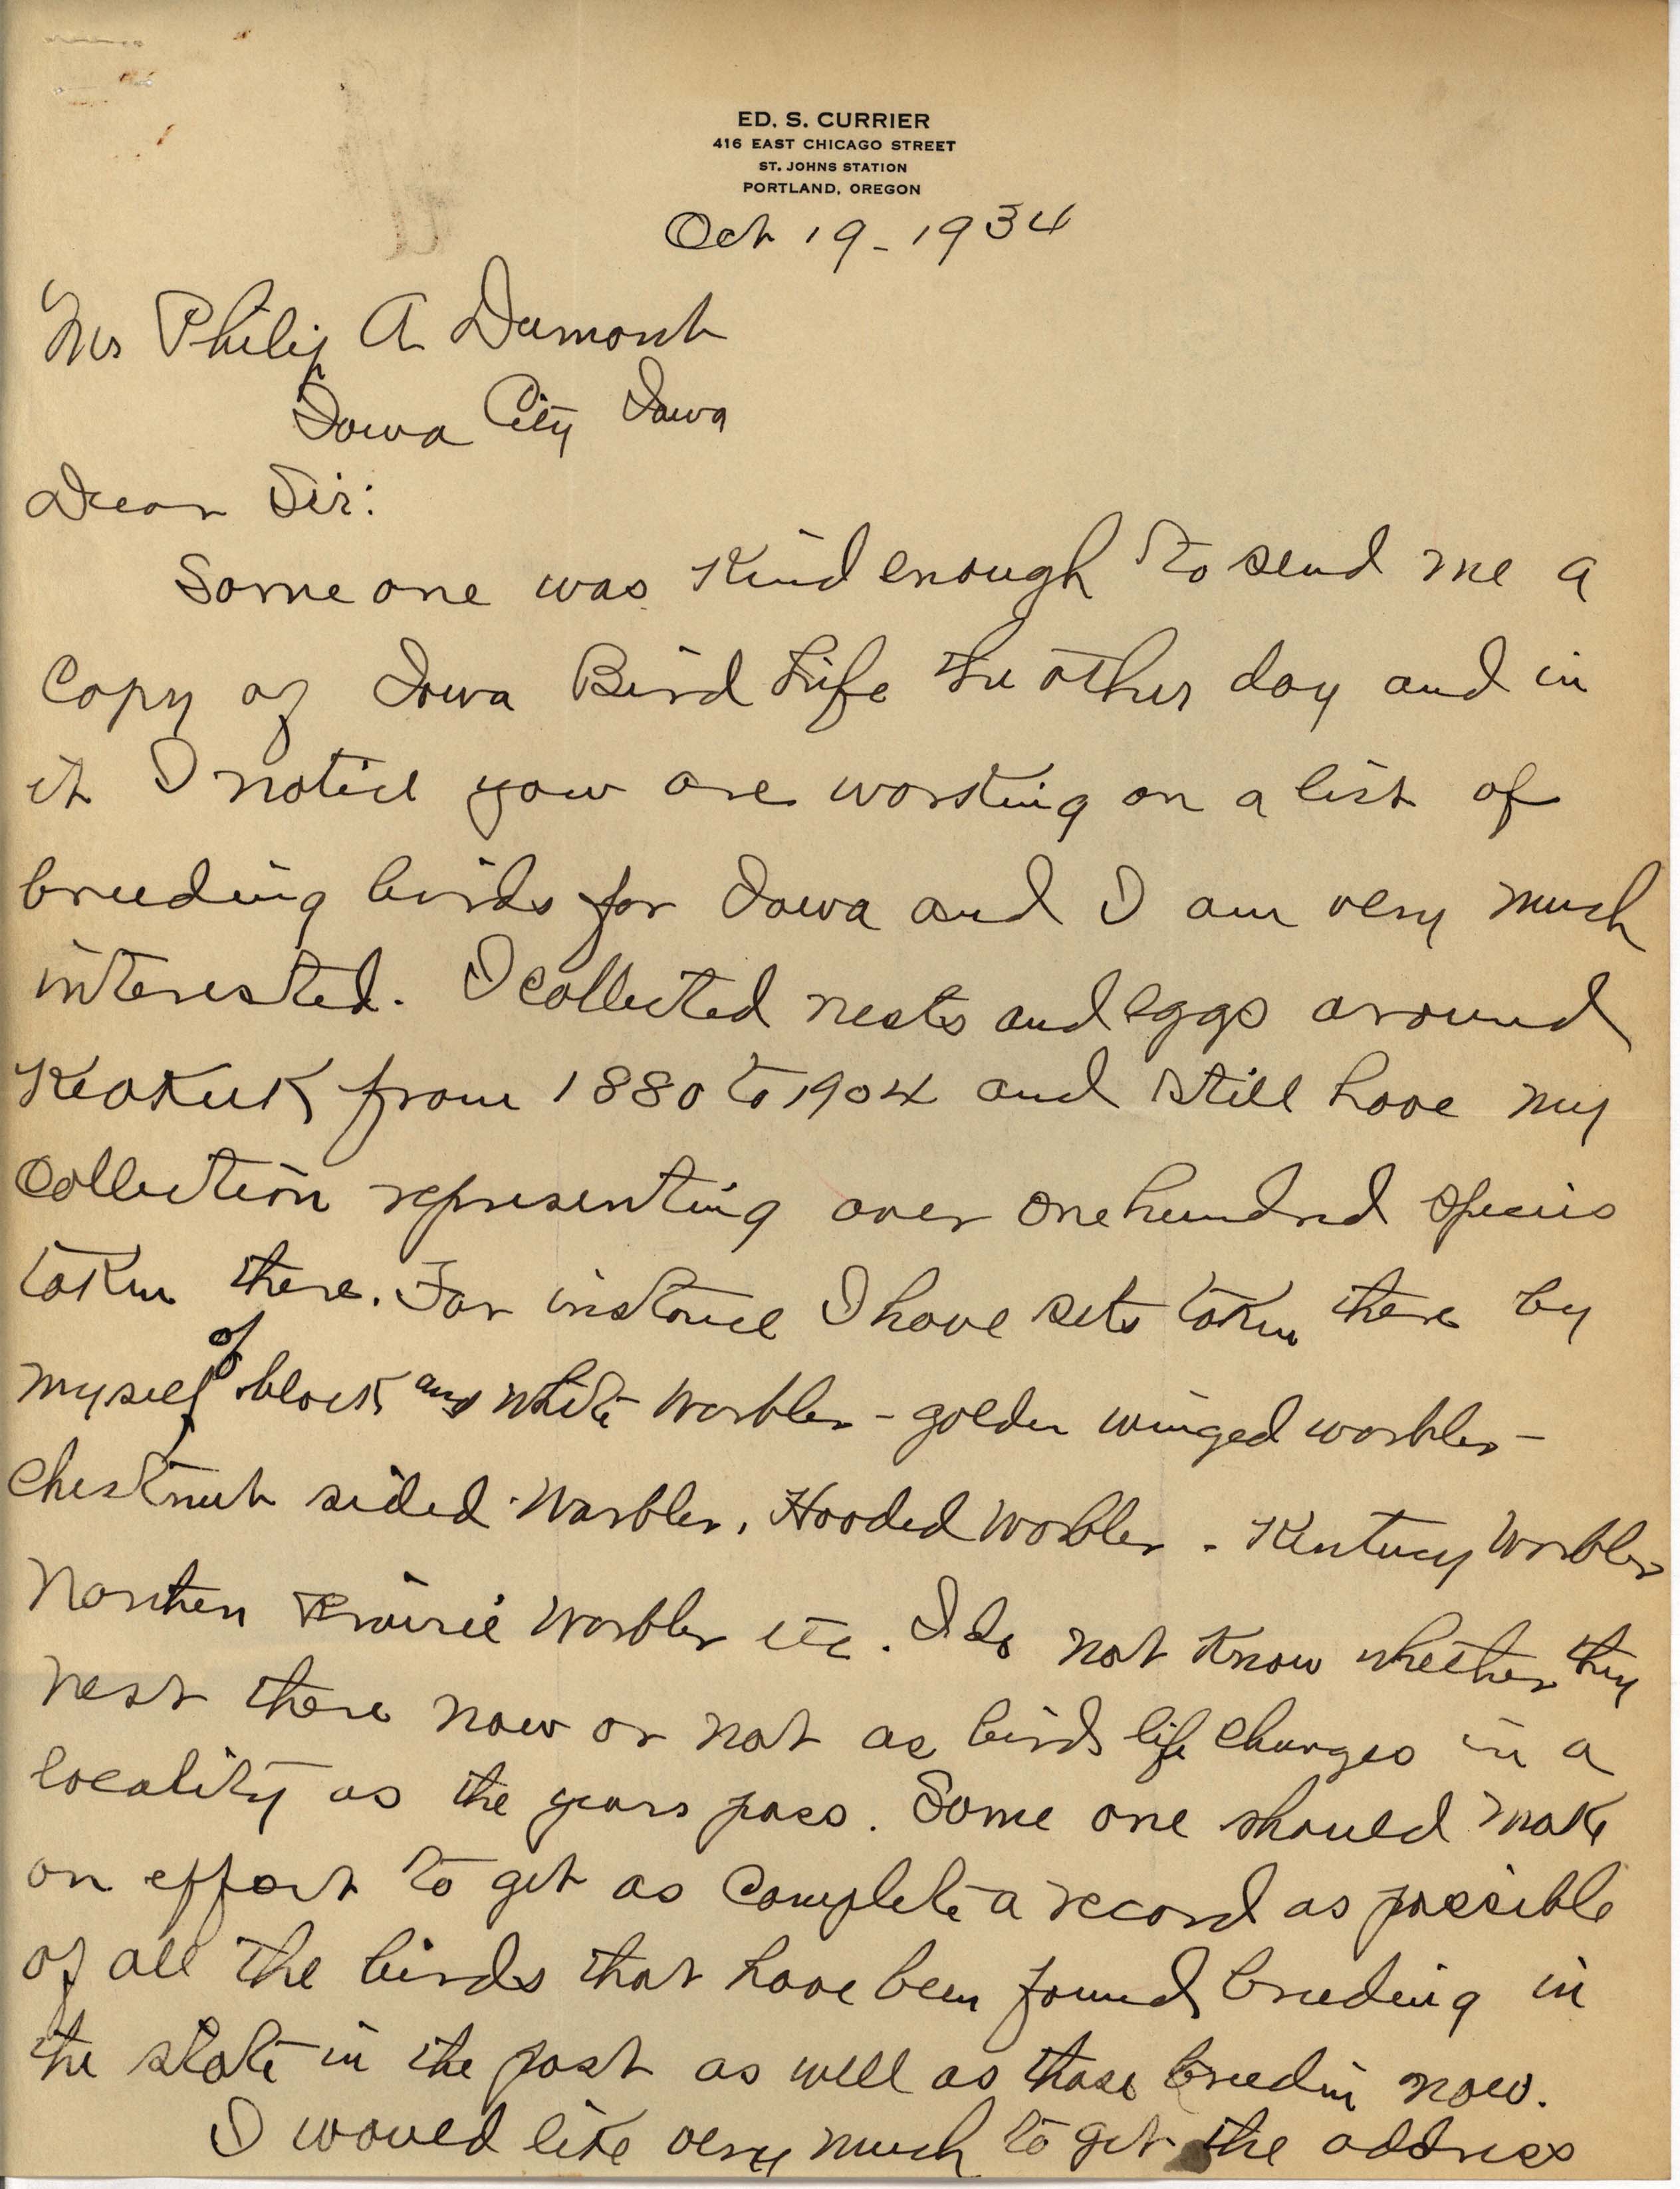 Ed Currier letter to Philip DuMont regarding nest and egg collection, October 19, 1934